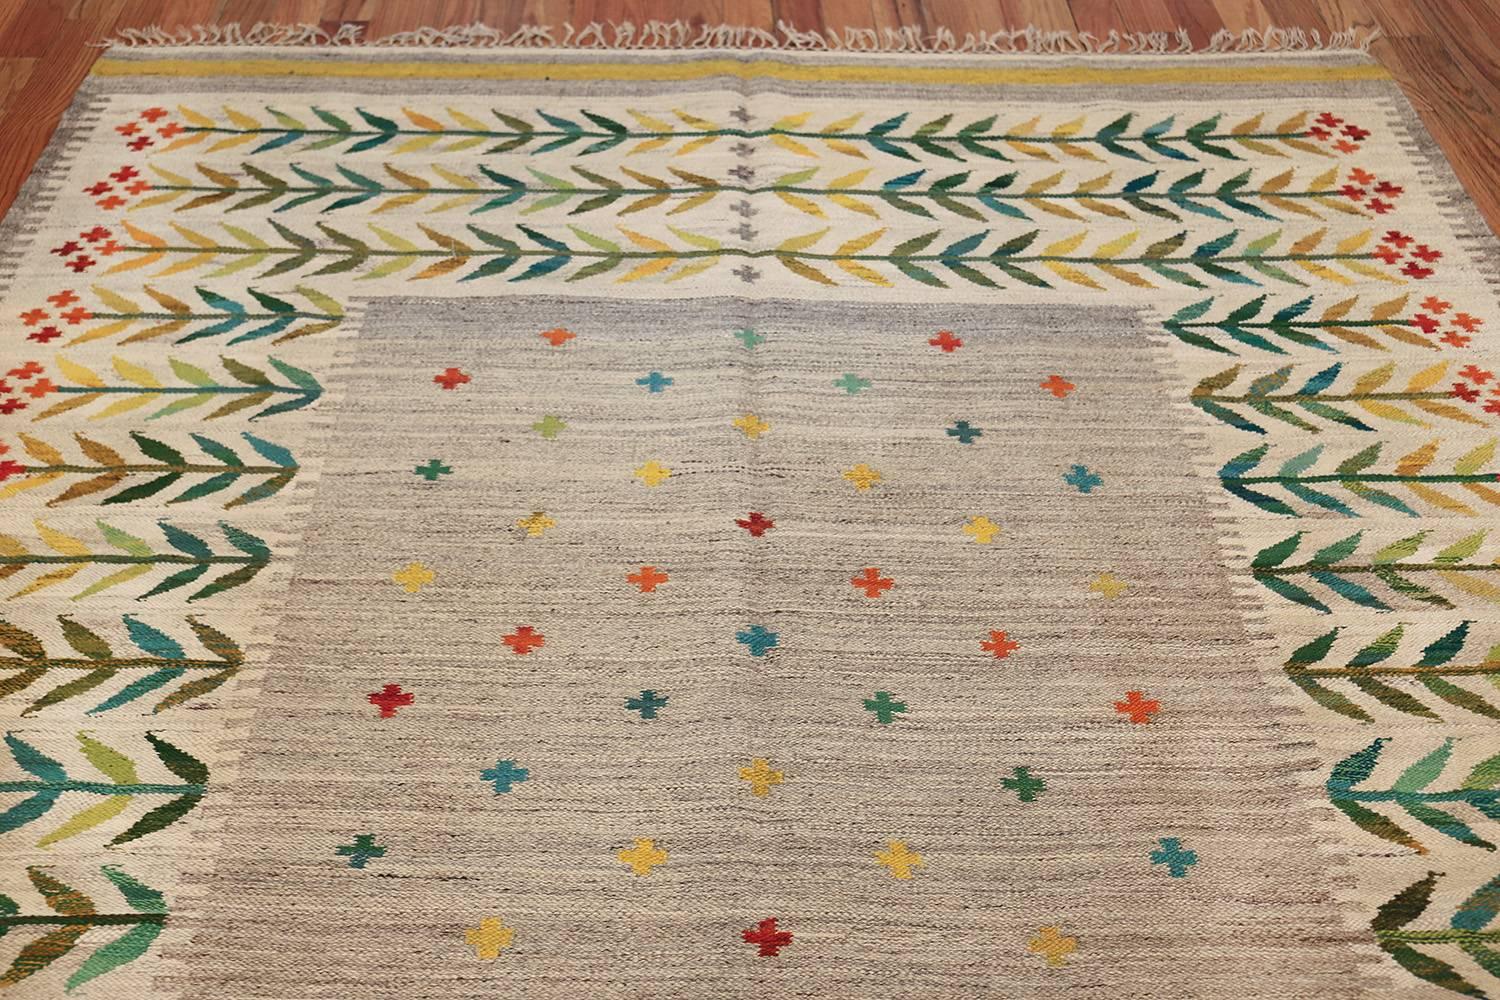 Hand-Woven Vintage Scandinavian Flat Woven Swedish Kilim Rug. Size: 6 ft 8 in x 9 ft 9 in